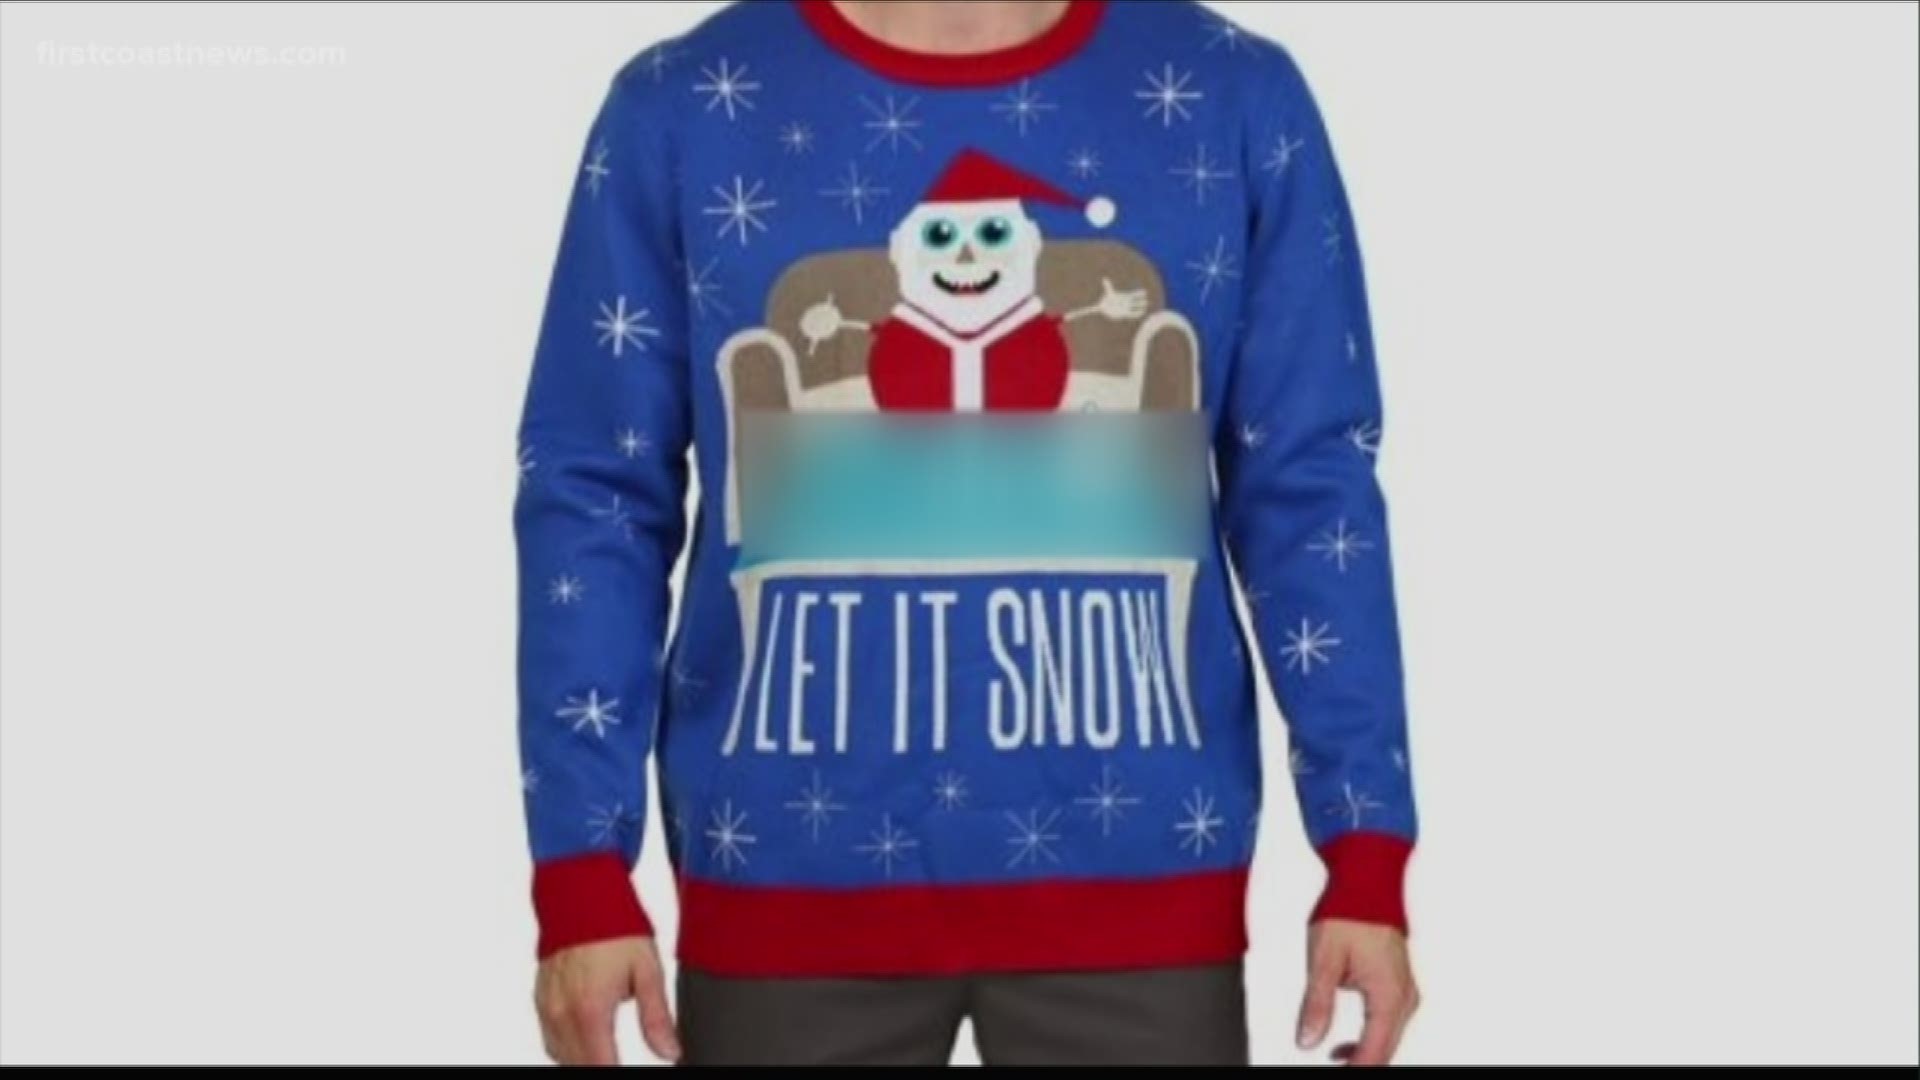 Walmart has pulled a sweater from its shelves after facing backlash. The sweater features a snowman and makes a drug reference.